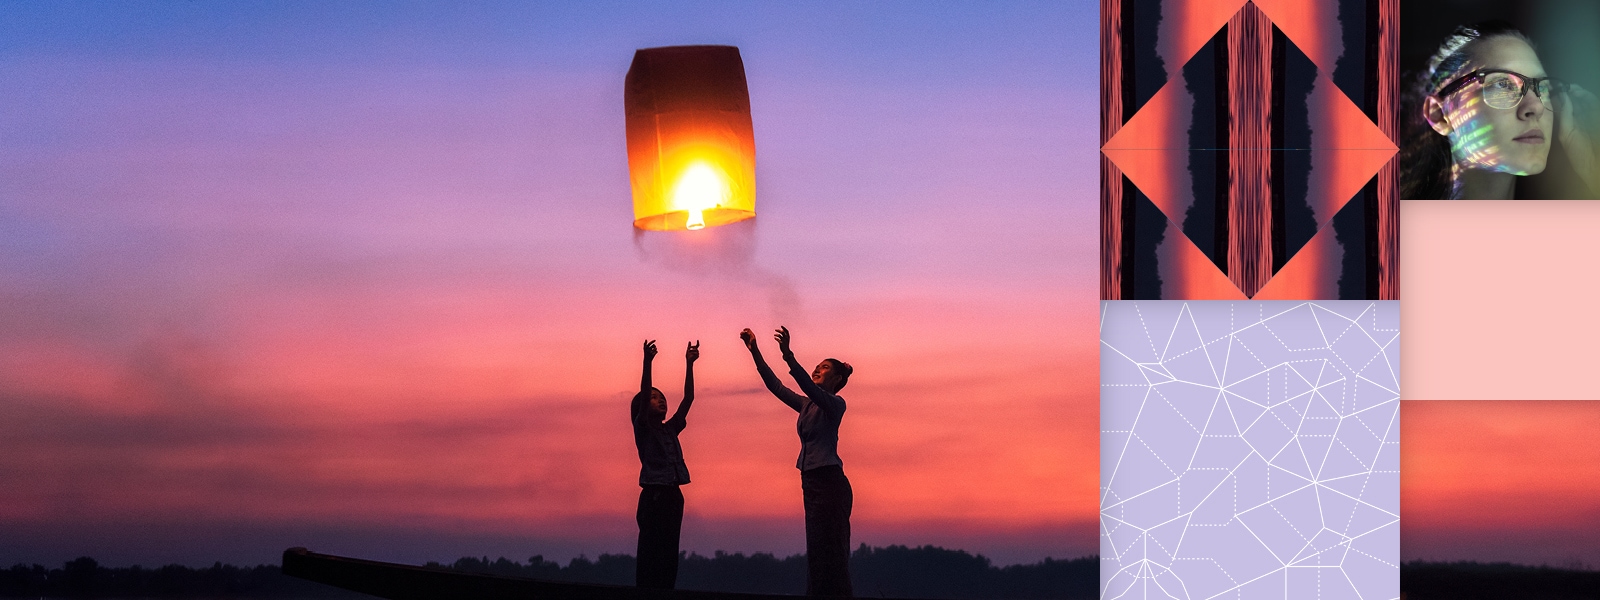 Silhouette family releasing illuminated lanterns while standing in sea at dusk, with an abstract overlay.